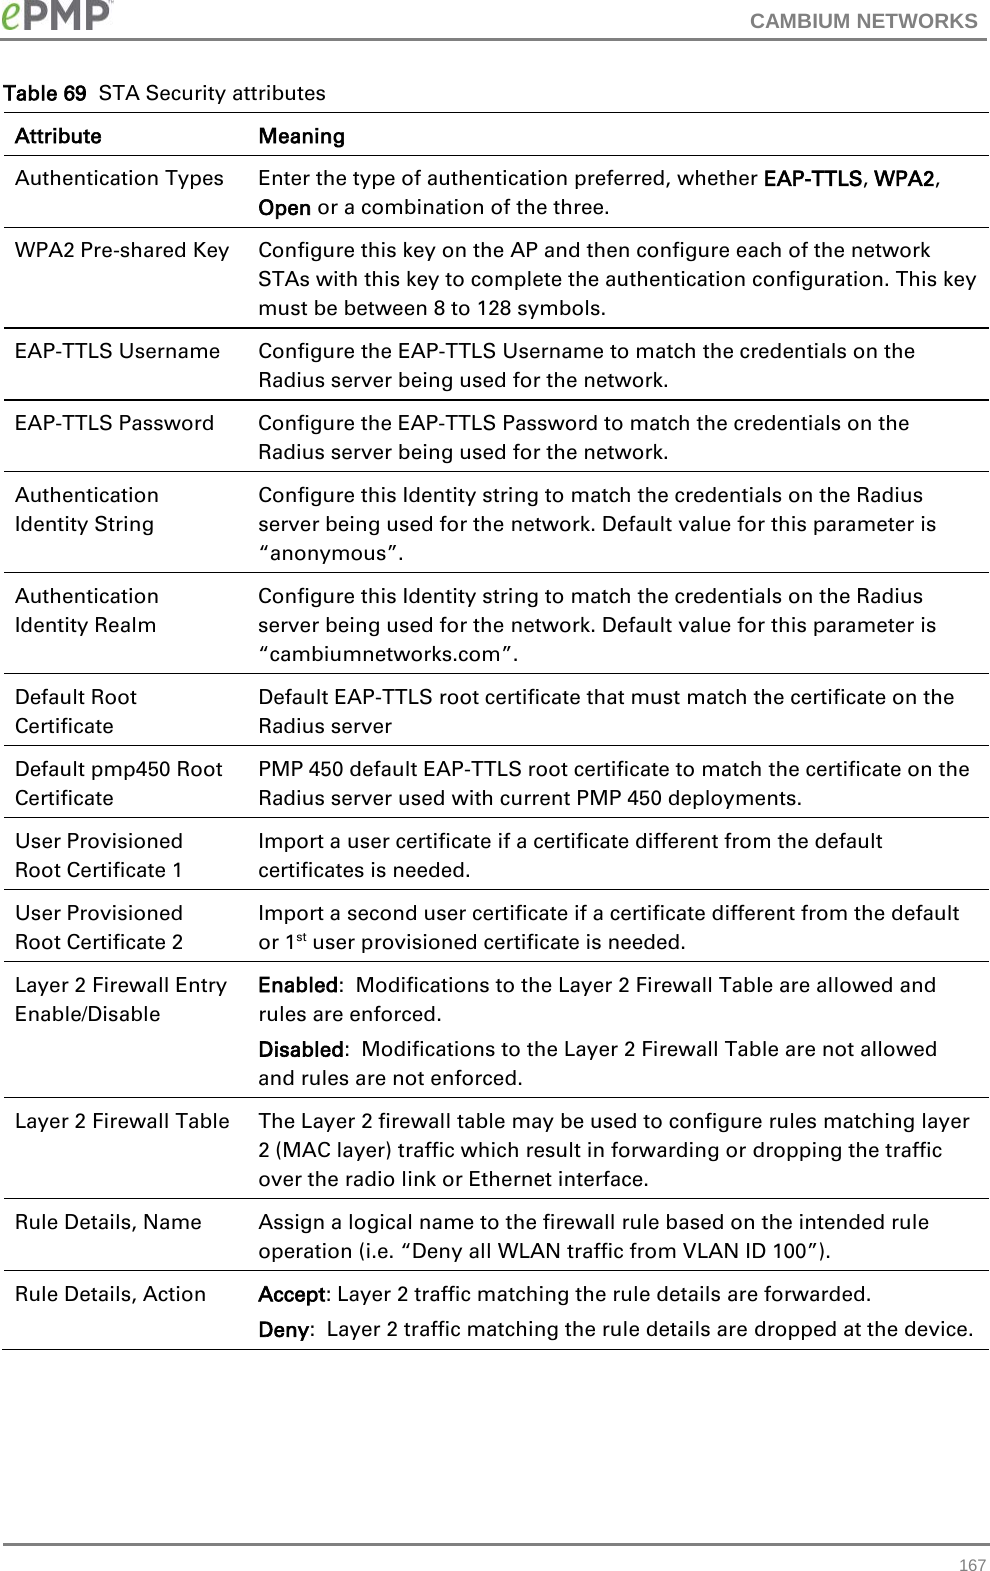 CAMBIUM NETWORKS  Table 69  STA Security attributes Attribute Meaning Authentication Types Enter the type of authentication preferred, whether EAP-TTLS, WPA2, Open or a combination of the three.  WPA2 Pre-shared Key Configure this key on the AP and then configure each of the network STAs with this key to complete the authentication configuration. This key must be between 8 to 128 symbols. EAP-TTLS Username Configure the EAP-TTLS Username to match the credentials on the Radius server being used for the network.   EAP-TTLS Password Configure the EAP-TTLS Password to match the credentials on the Radius server being used for the network.   Authentication Identity String Configure this Identity string to match the credentials on the Radius server being used for the network. Default value for this parameter is “anonymous”. Authentication Identity Realm Configure this Identity string to match the credentials on the Radius server being used for the network. Default value for this parameter is “cambiumnetworks.com”. Default Root Certificate Default EAP-TTLS root certificate that must match the certificate on the Radius server Default pmp450 Root Certificate PMP 450 default EAP-TTLS root certificate to match the certificate on the Radius server used with current PMP 450 deployments.  User Provisioned Root Certificate 1 Import a user certificate if a certificate different from the default certificates is needed. User Provisioned Root Certificate 2 Import a second user certificate if a certificate different from the default or 1st user provisioned certificate is needed. Layer 2 Firewall Entry Enable/Disable Enabled:  Modifications to the Layer 2 Firewall Table are allowed and rules are enforced. Disabled:  Modifications to the Layer 2 Firewall Table are not allowed and rules are not enforced. Layer 2 Firewall Table The Layer 2 firewall table may be used to configure rules matching layer 2 (MAC layer) traffic which result in forwarding or dropping the traffic over the radio link or Ethernet interface. Rule Details, Name Assign a logical name to the firewall rule based on the intended rule operation (i.e. “Deny all WLAN traffic from VLAN ID 100”). Rule Details, Action Accept: Layer 2 traffic matching the rule details are forwarded. Deny:  Layer 2 traffic matching the rule details are dropped at the device.  167 